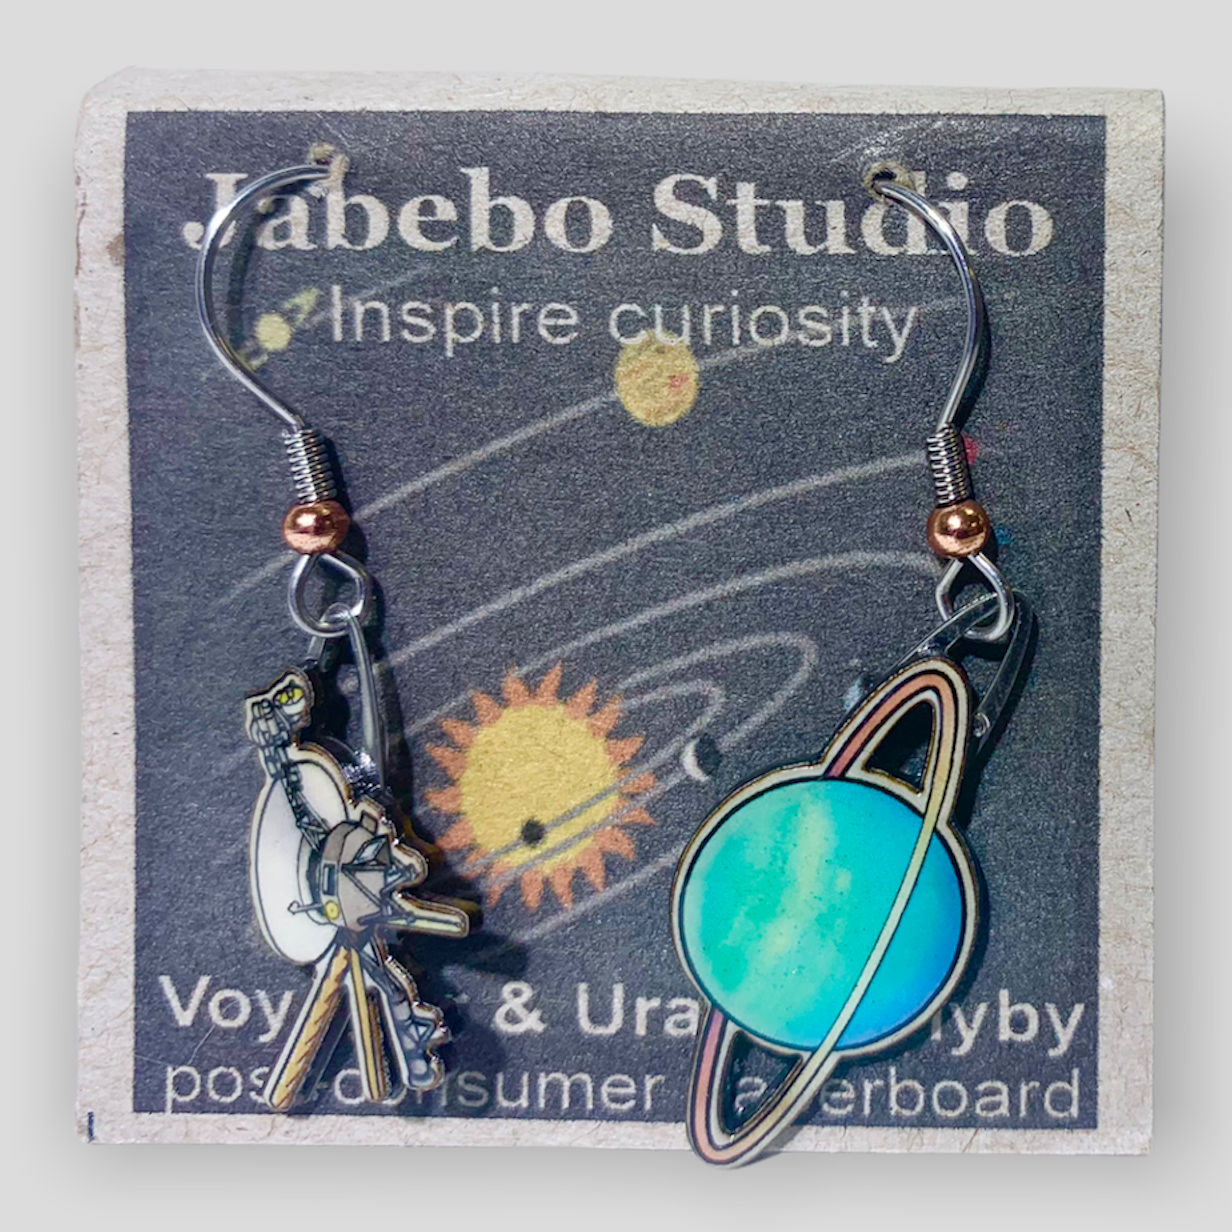 Picture shown is of 1 inch tall pair of earrings of Voyager Uranus Flyby.